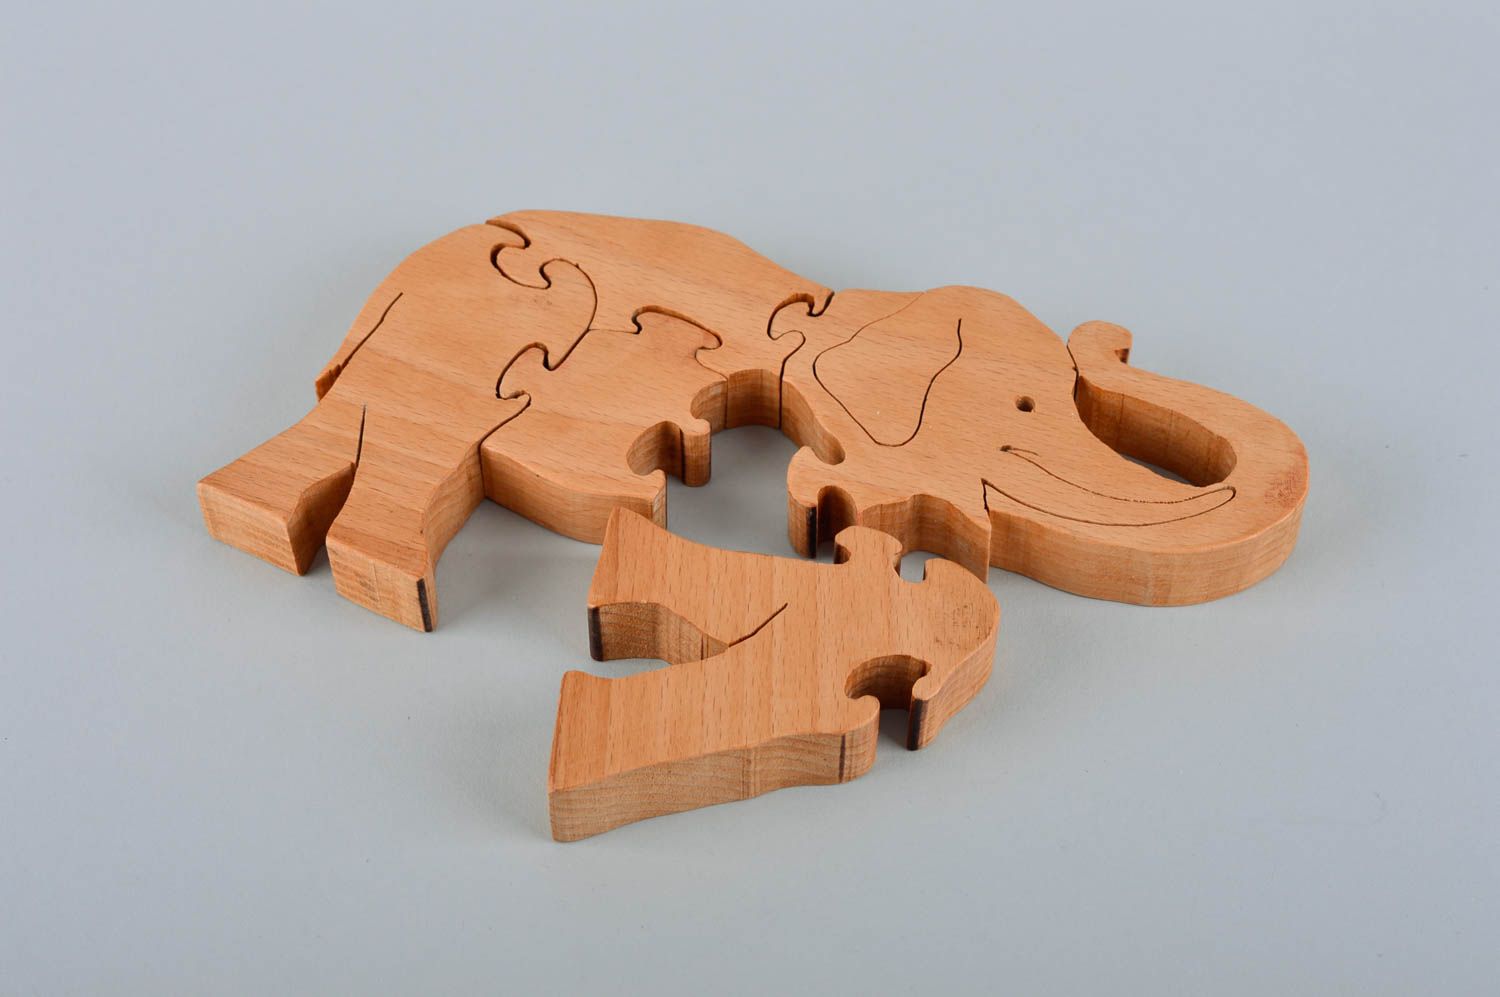 Handmade puzzle unusual puzzles wooden toy development game gift ideas photo 5